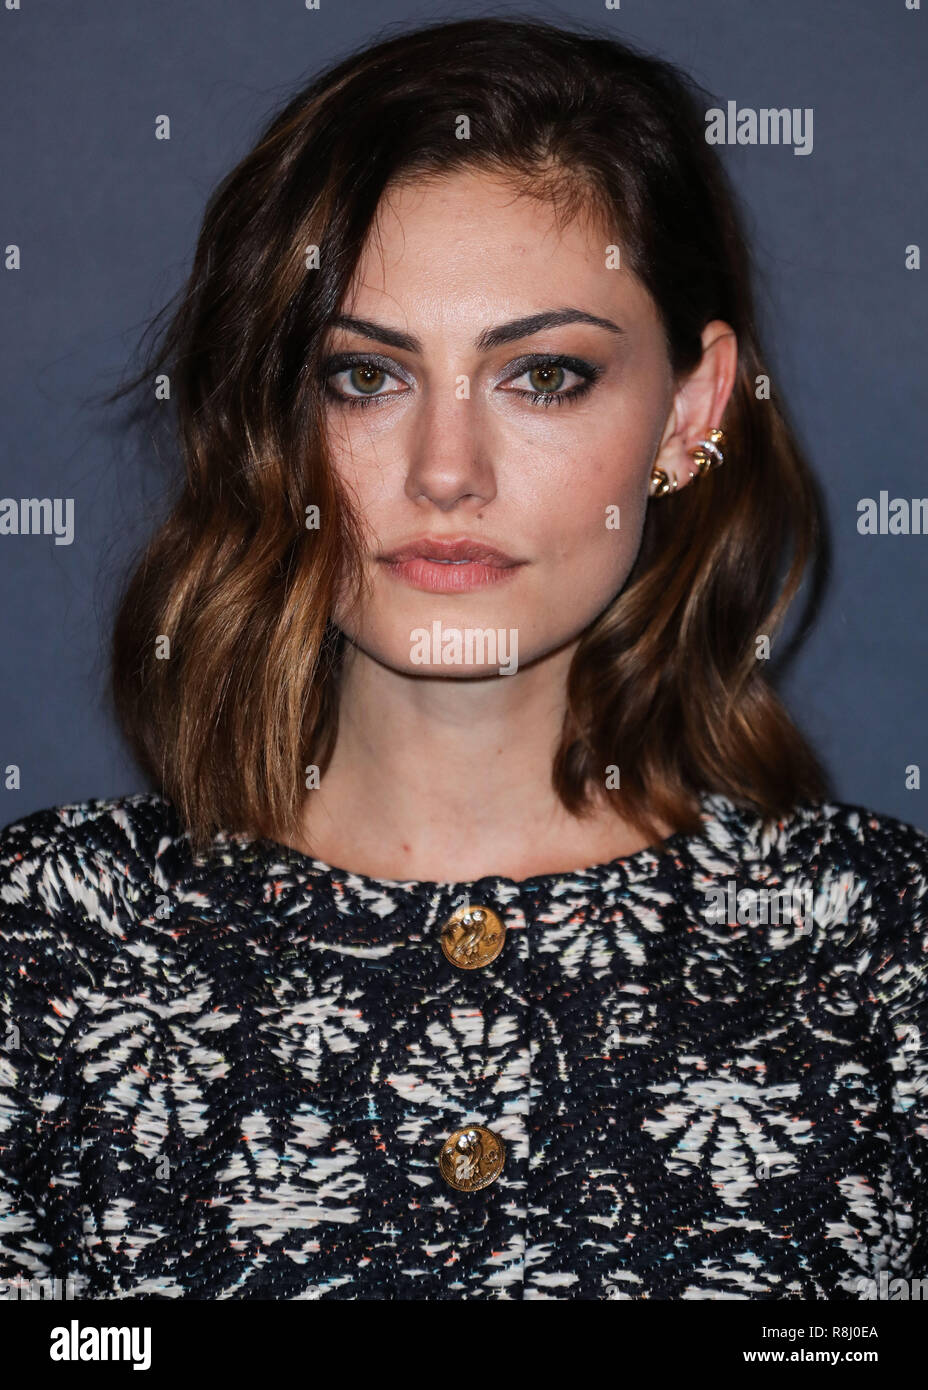 LOS ANGELES, CA, USA - OCTOBER 23: Actress Phoebe Tonkin wearing Chanel  arrives at the InStyle Awards 2017 held at the Getty Center on October 23,  2017 in Los Angeles, California, United